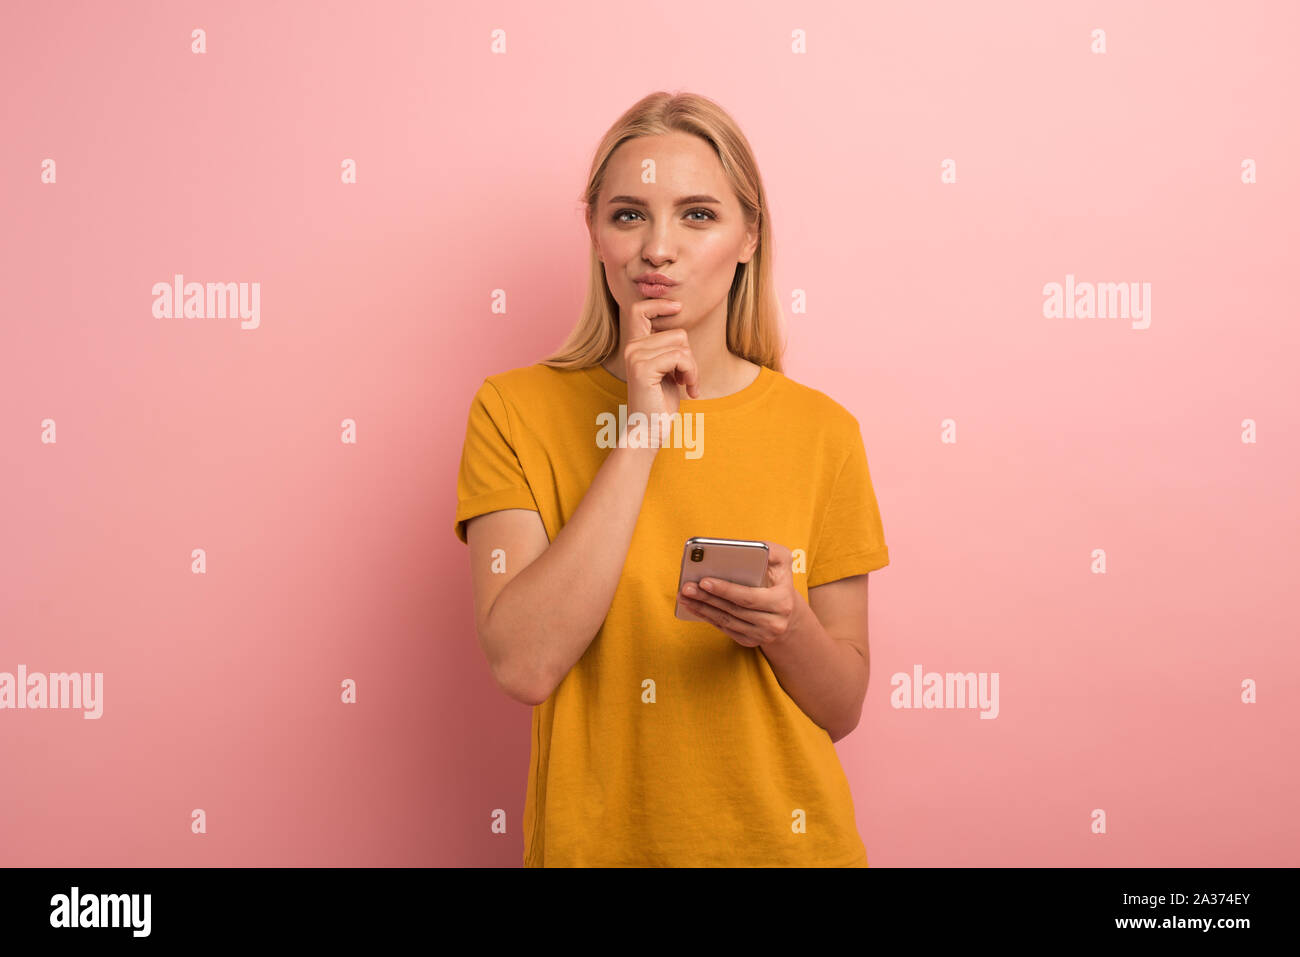 Blonde girl thinks about the right option. Yes or no. Confused and pensive expression. Pink background Stock Photo